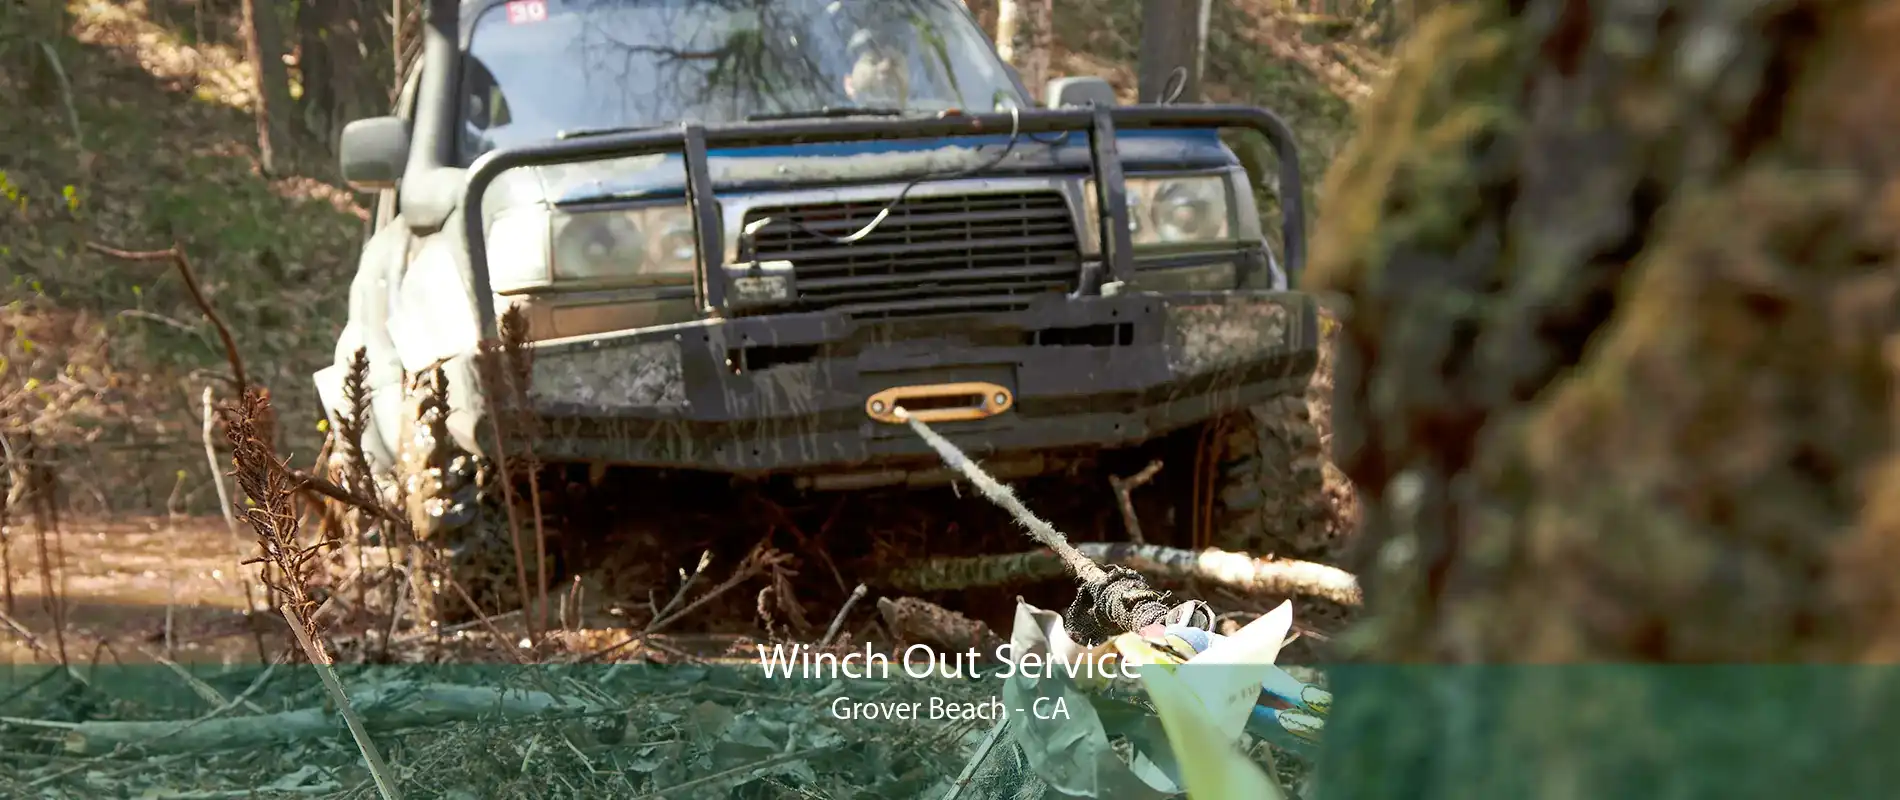 Winch Out Service Grover Beach - CA